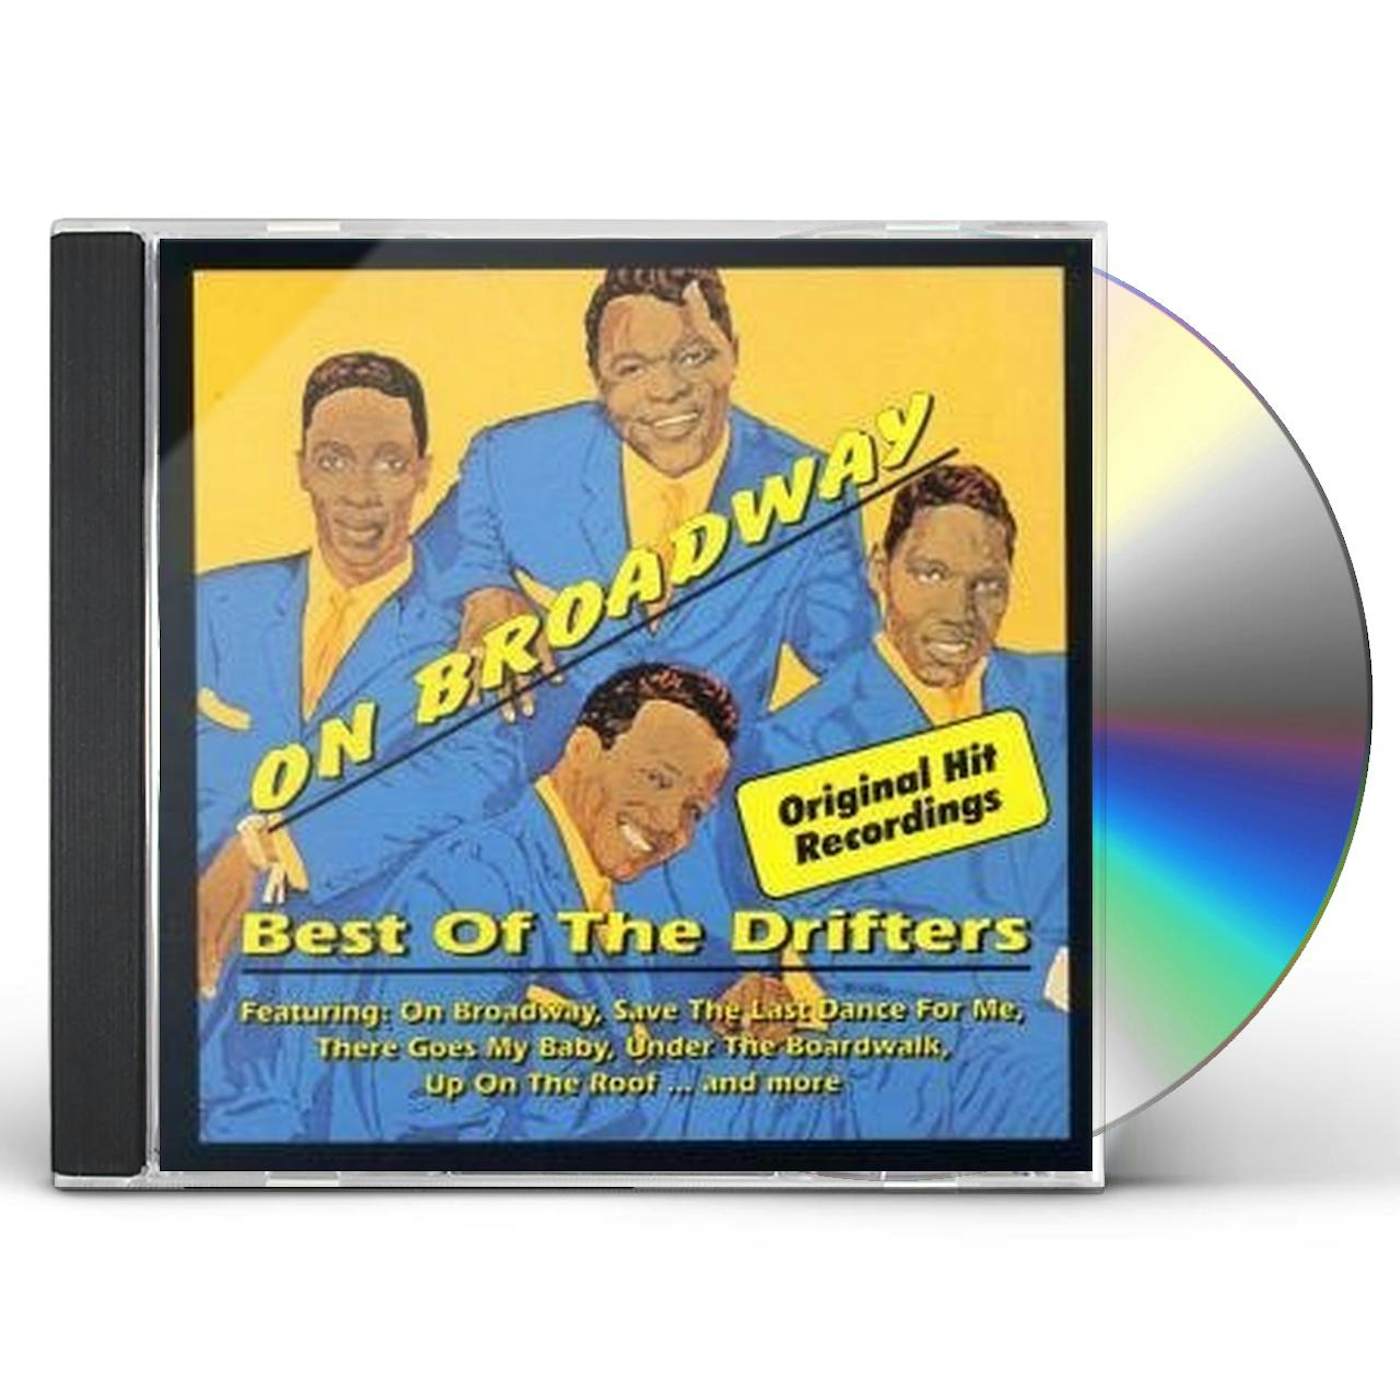 The Very Best of The Drifters